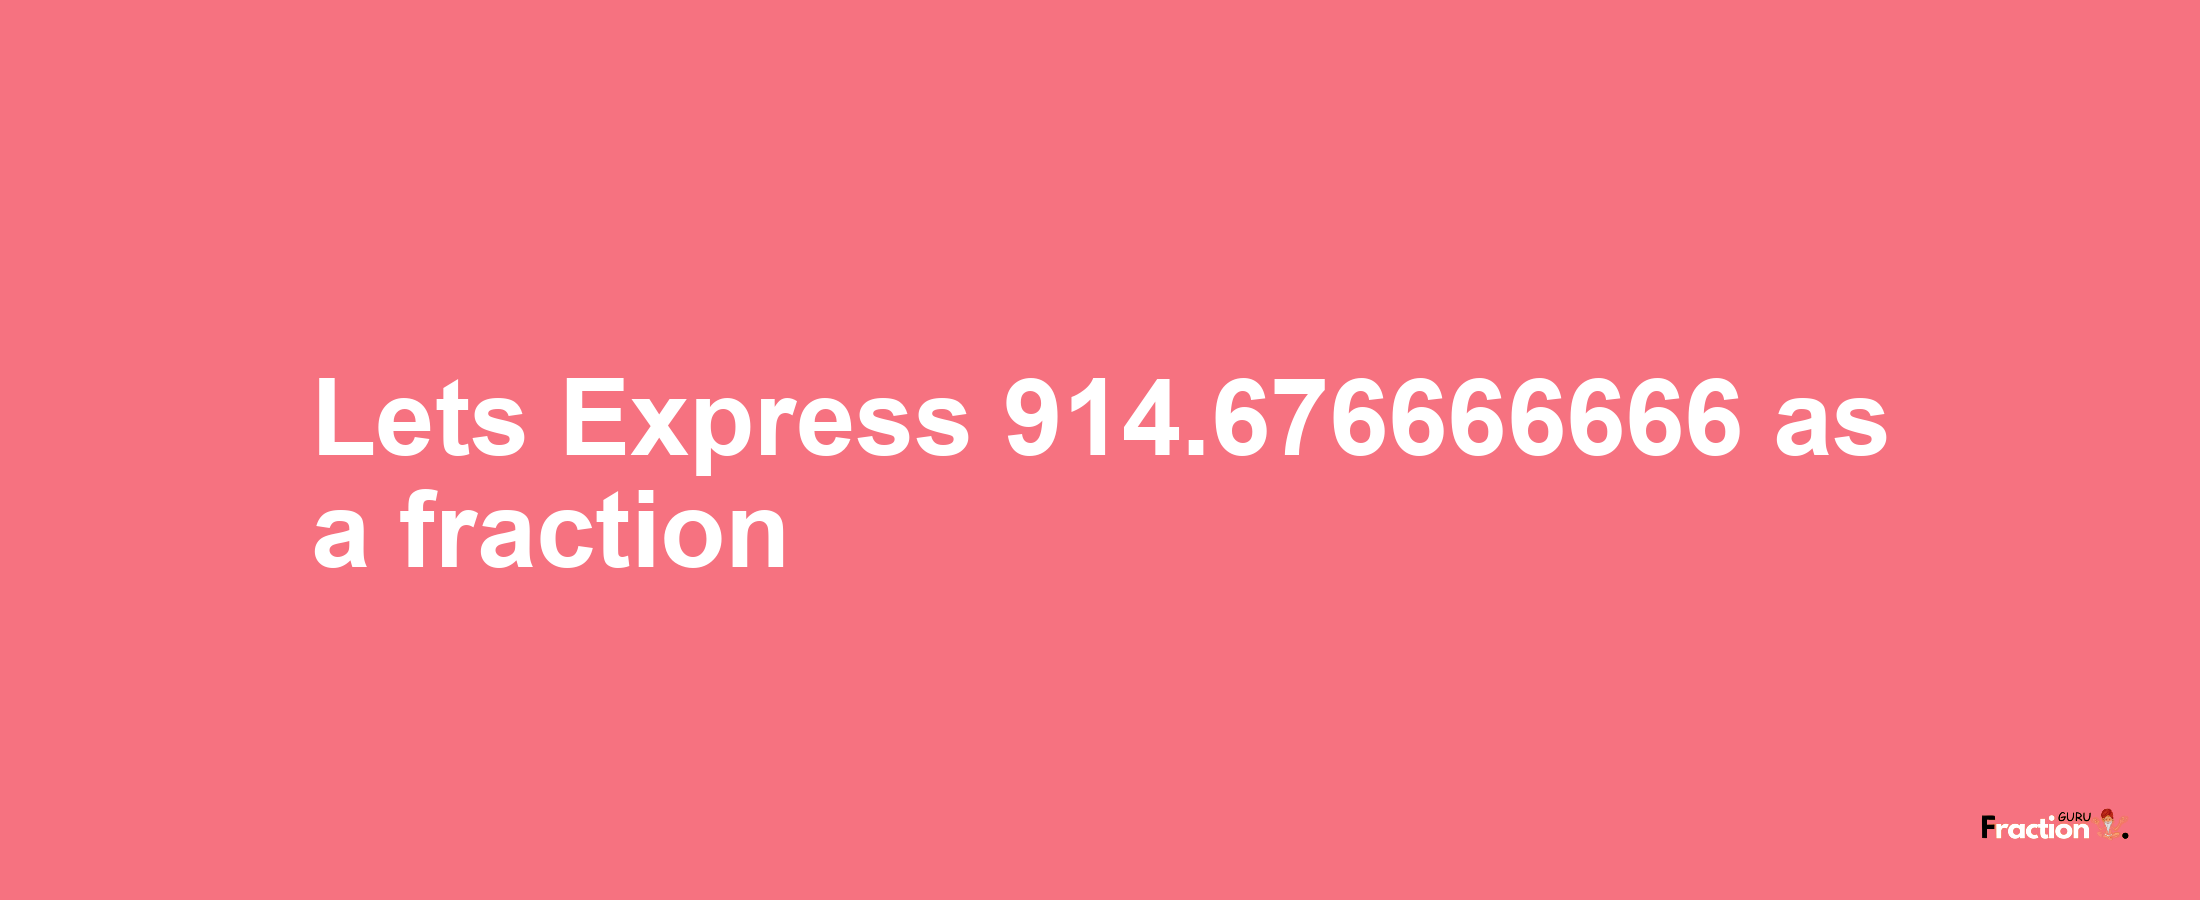 Lets Express 914.676666666 as afraction